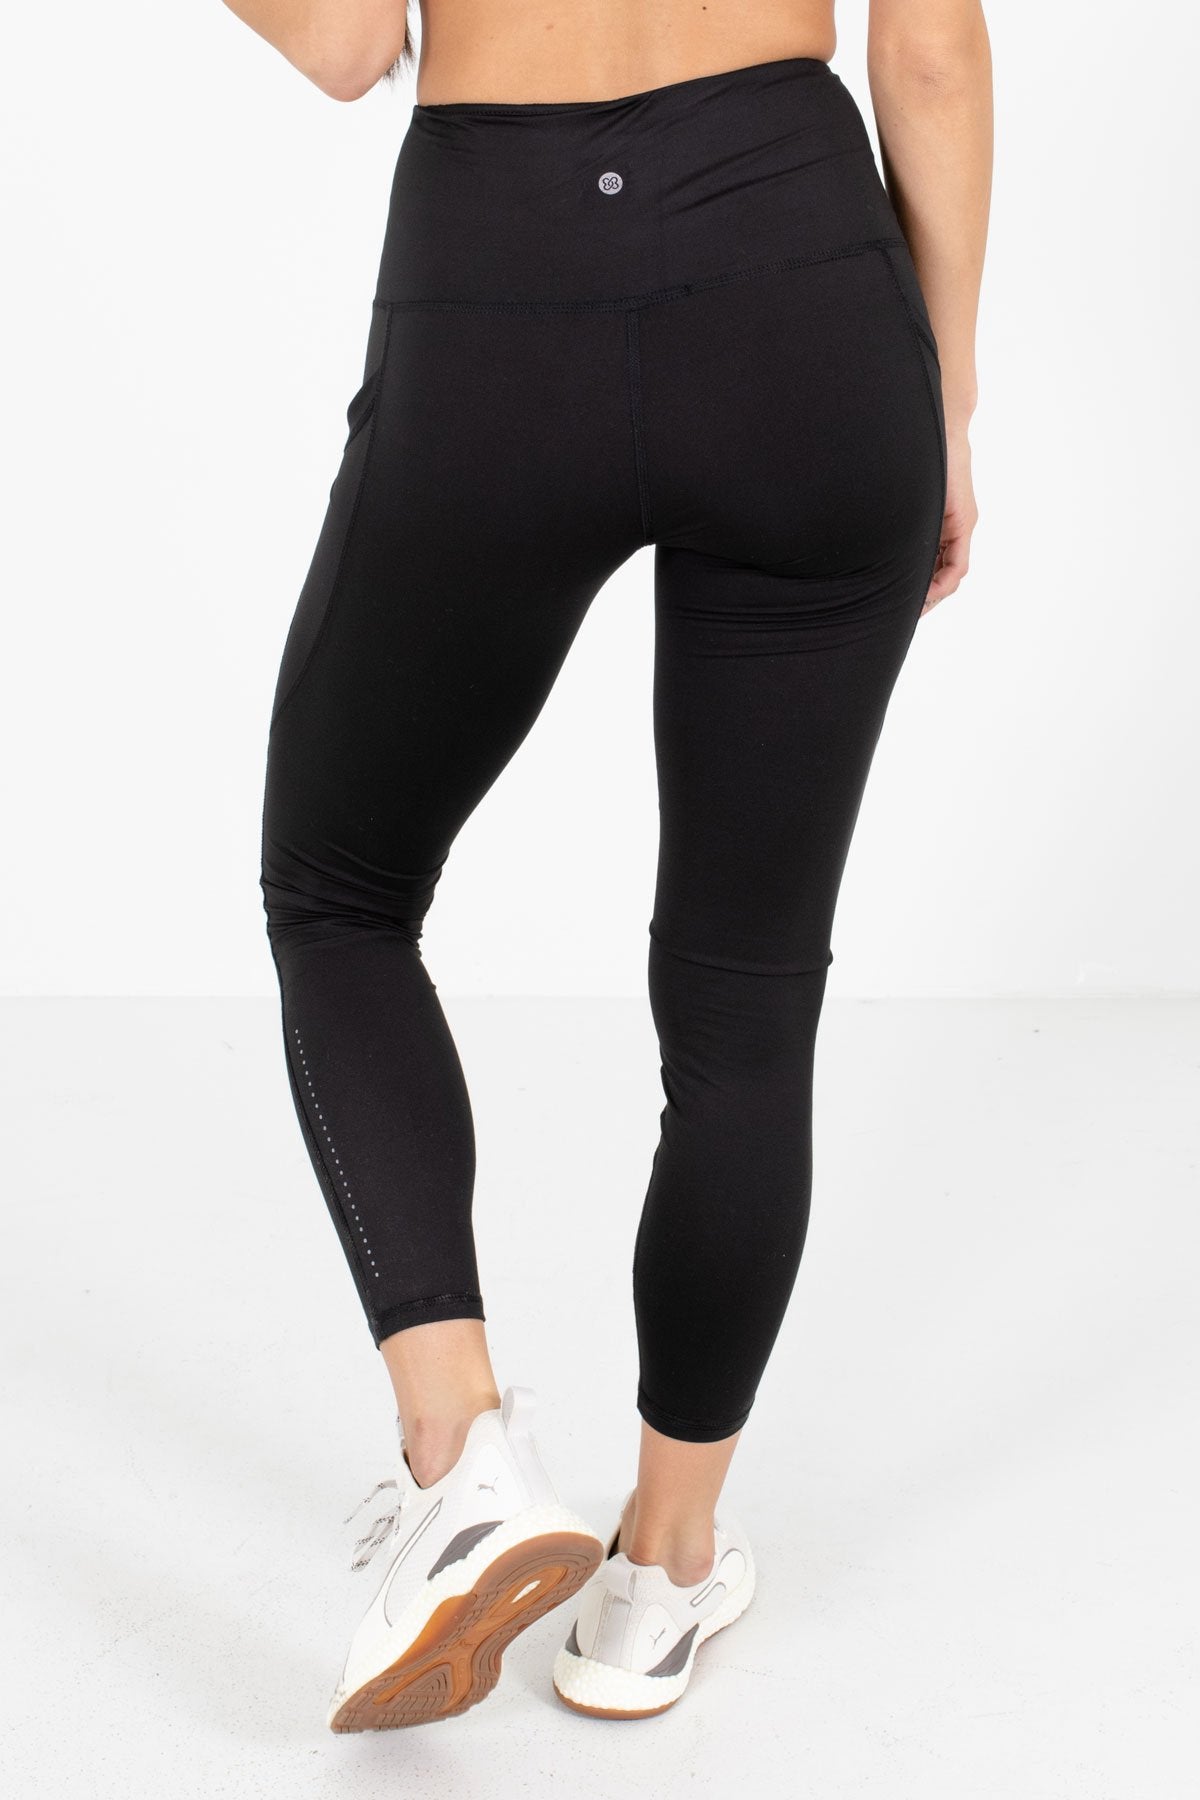 Women's Black Active Boutique Leggings with Side Pockets